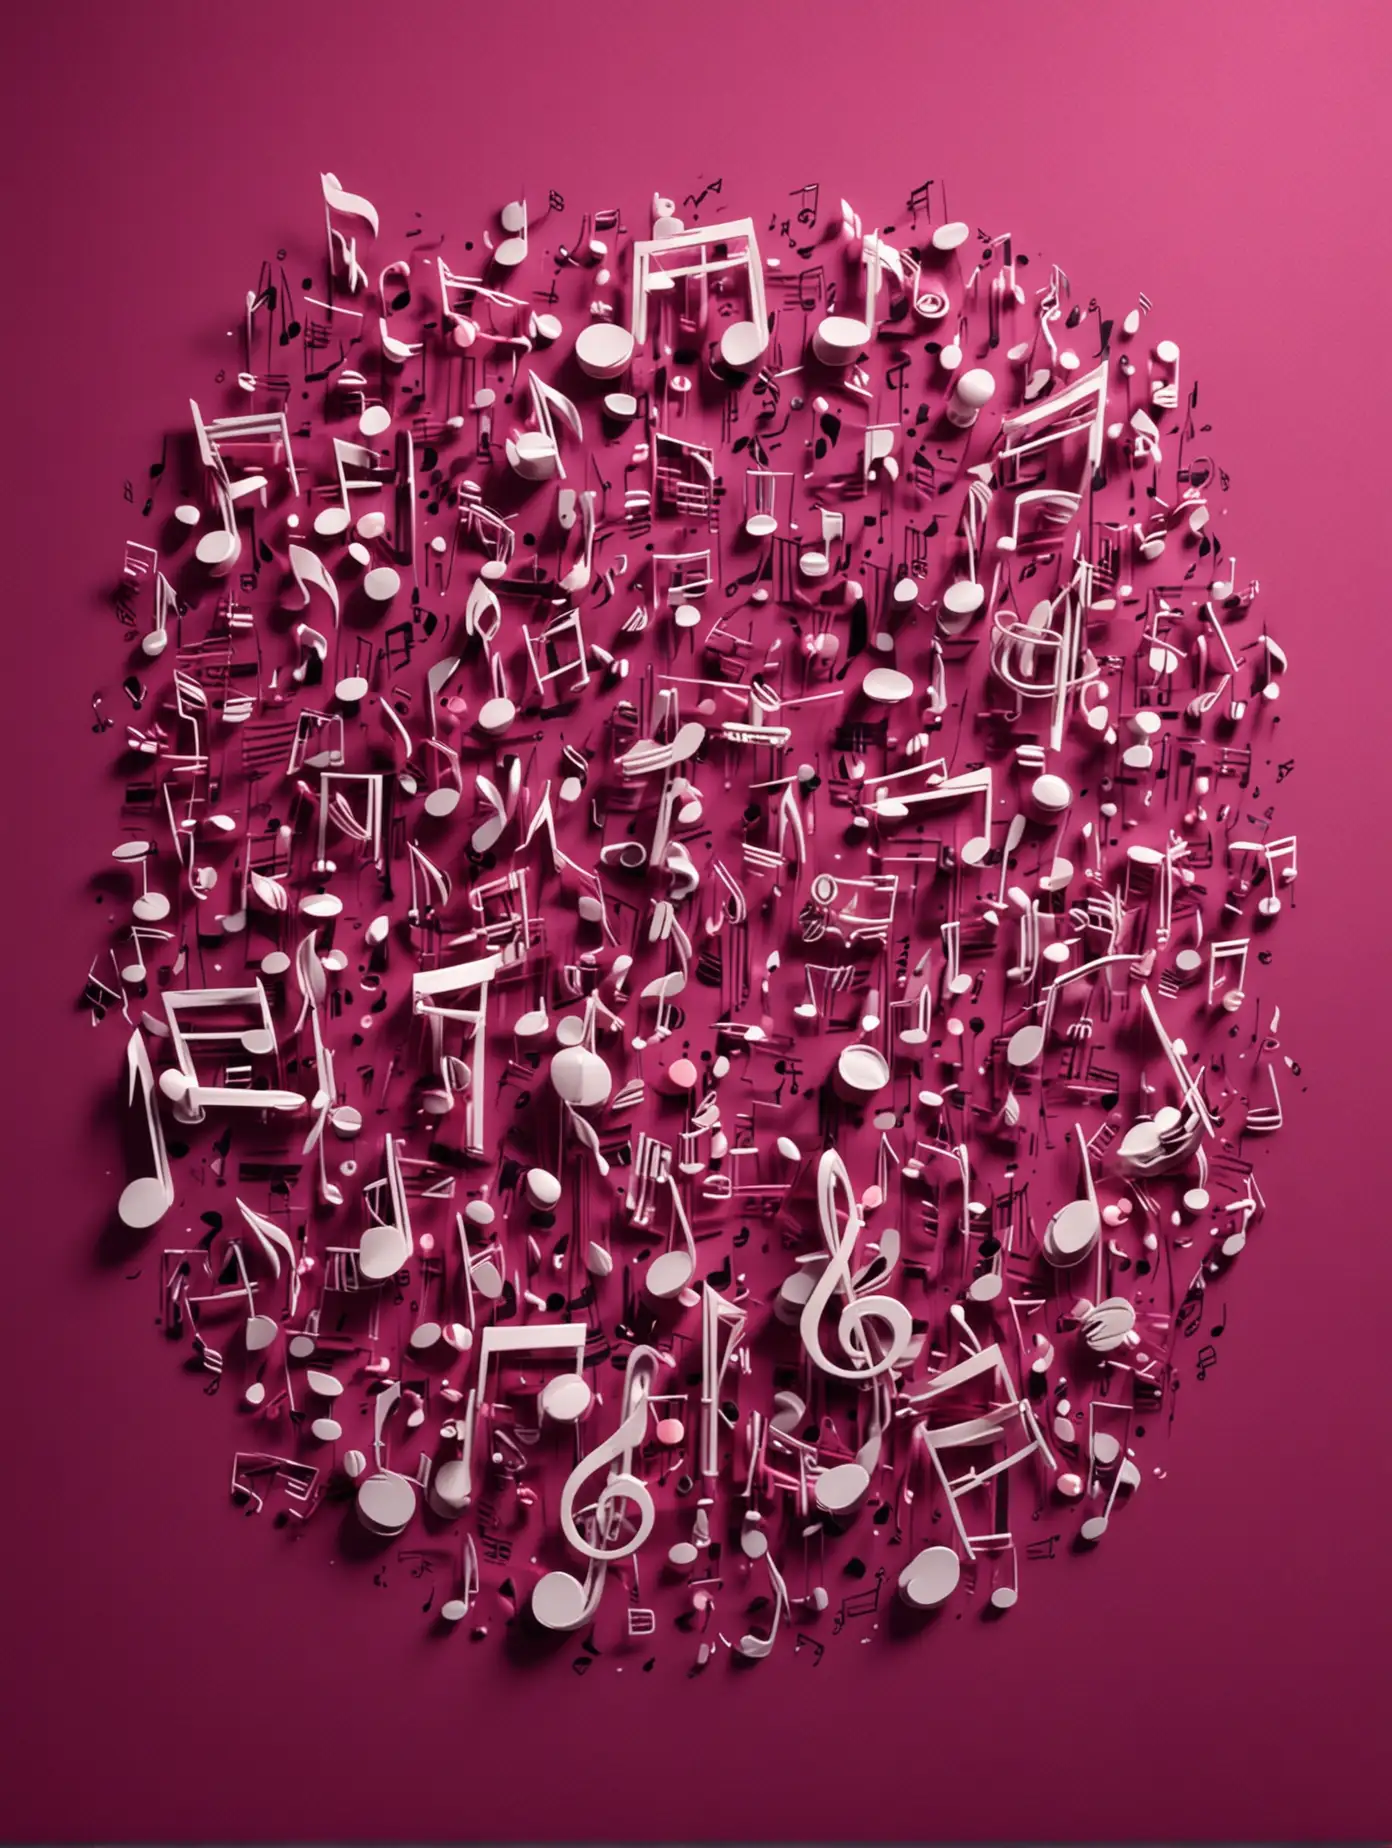 Large 3D musical notes scattered on a dark fuchsia background